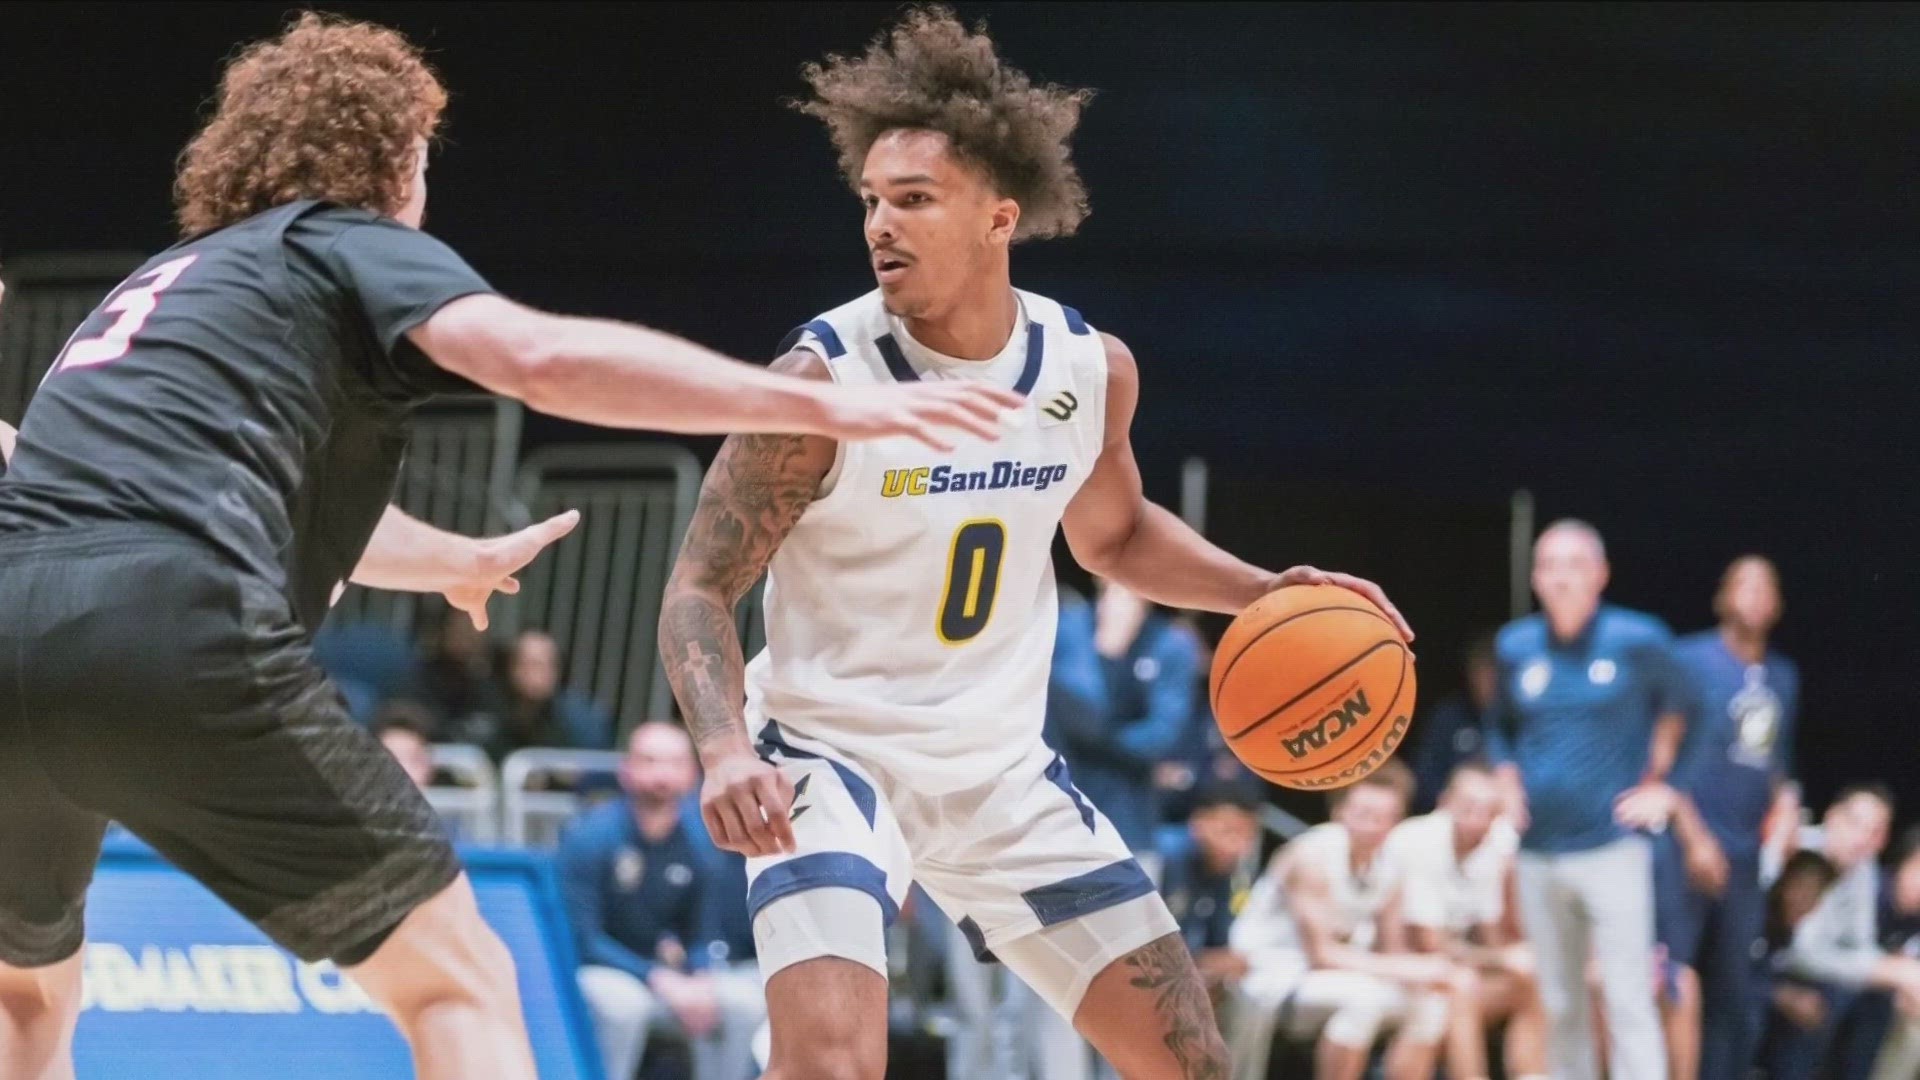 Former UC San Diego point guard Roddie Anderson was one of just three freshman in the NCAA to average more than 13 points, 3.5 rebounds and 3.5 assists this season.